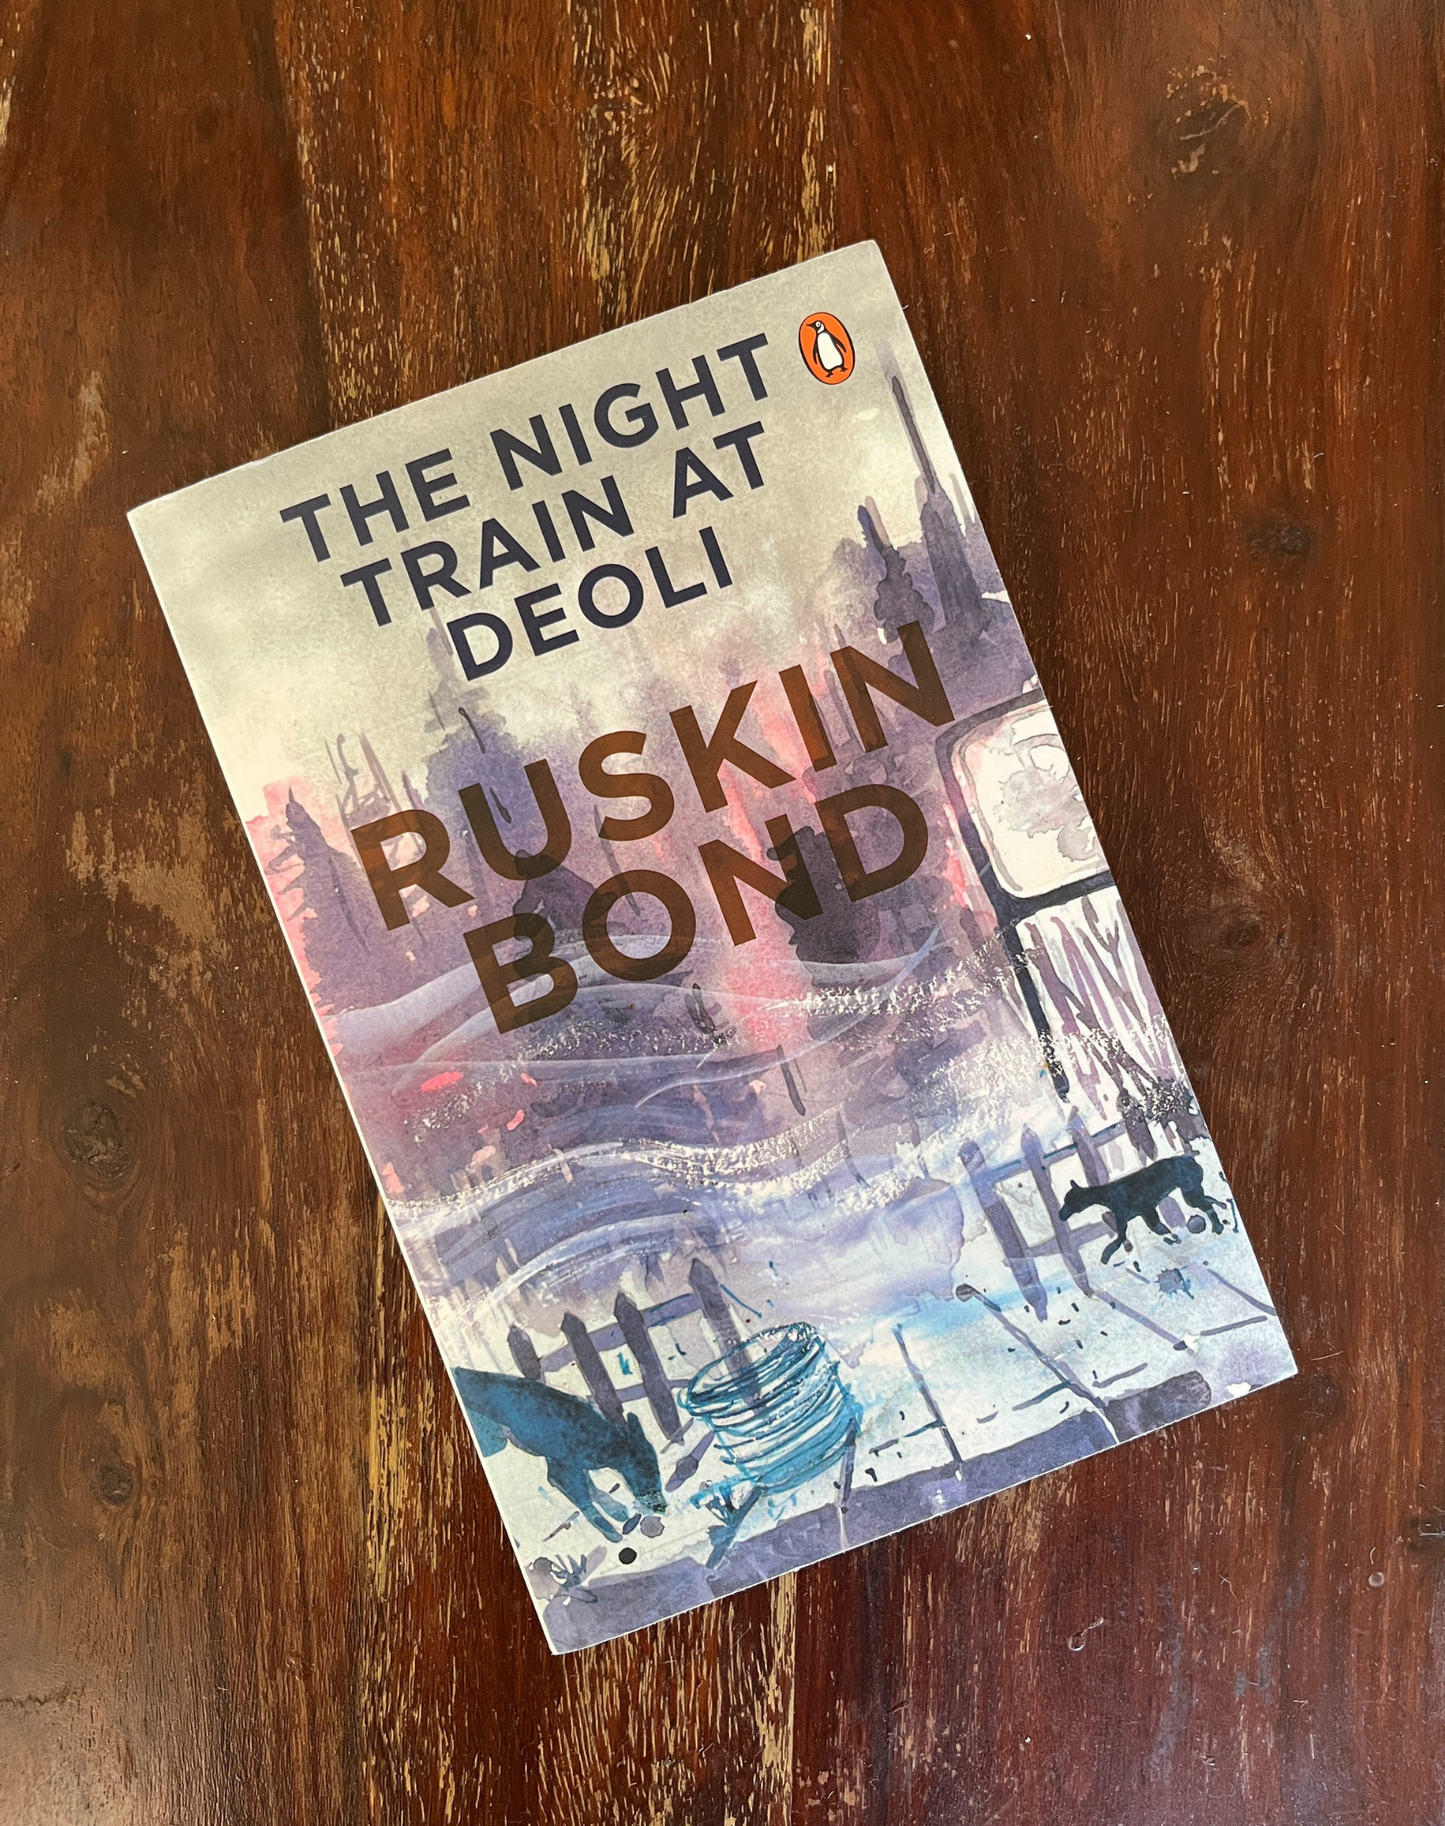 The Night Train at Deoli and Other Stories- Ruskin Bond